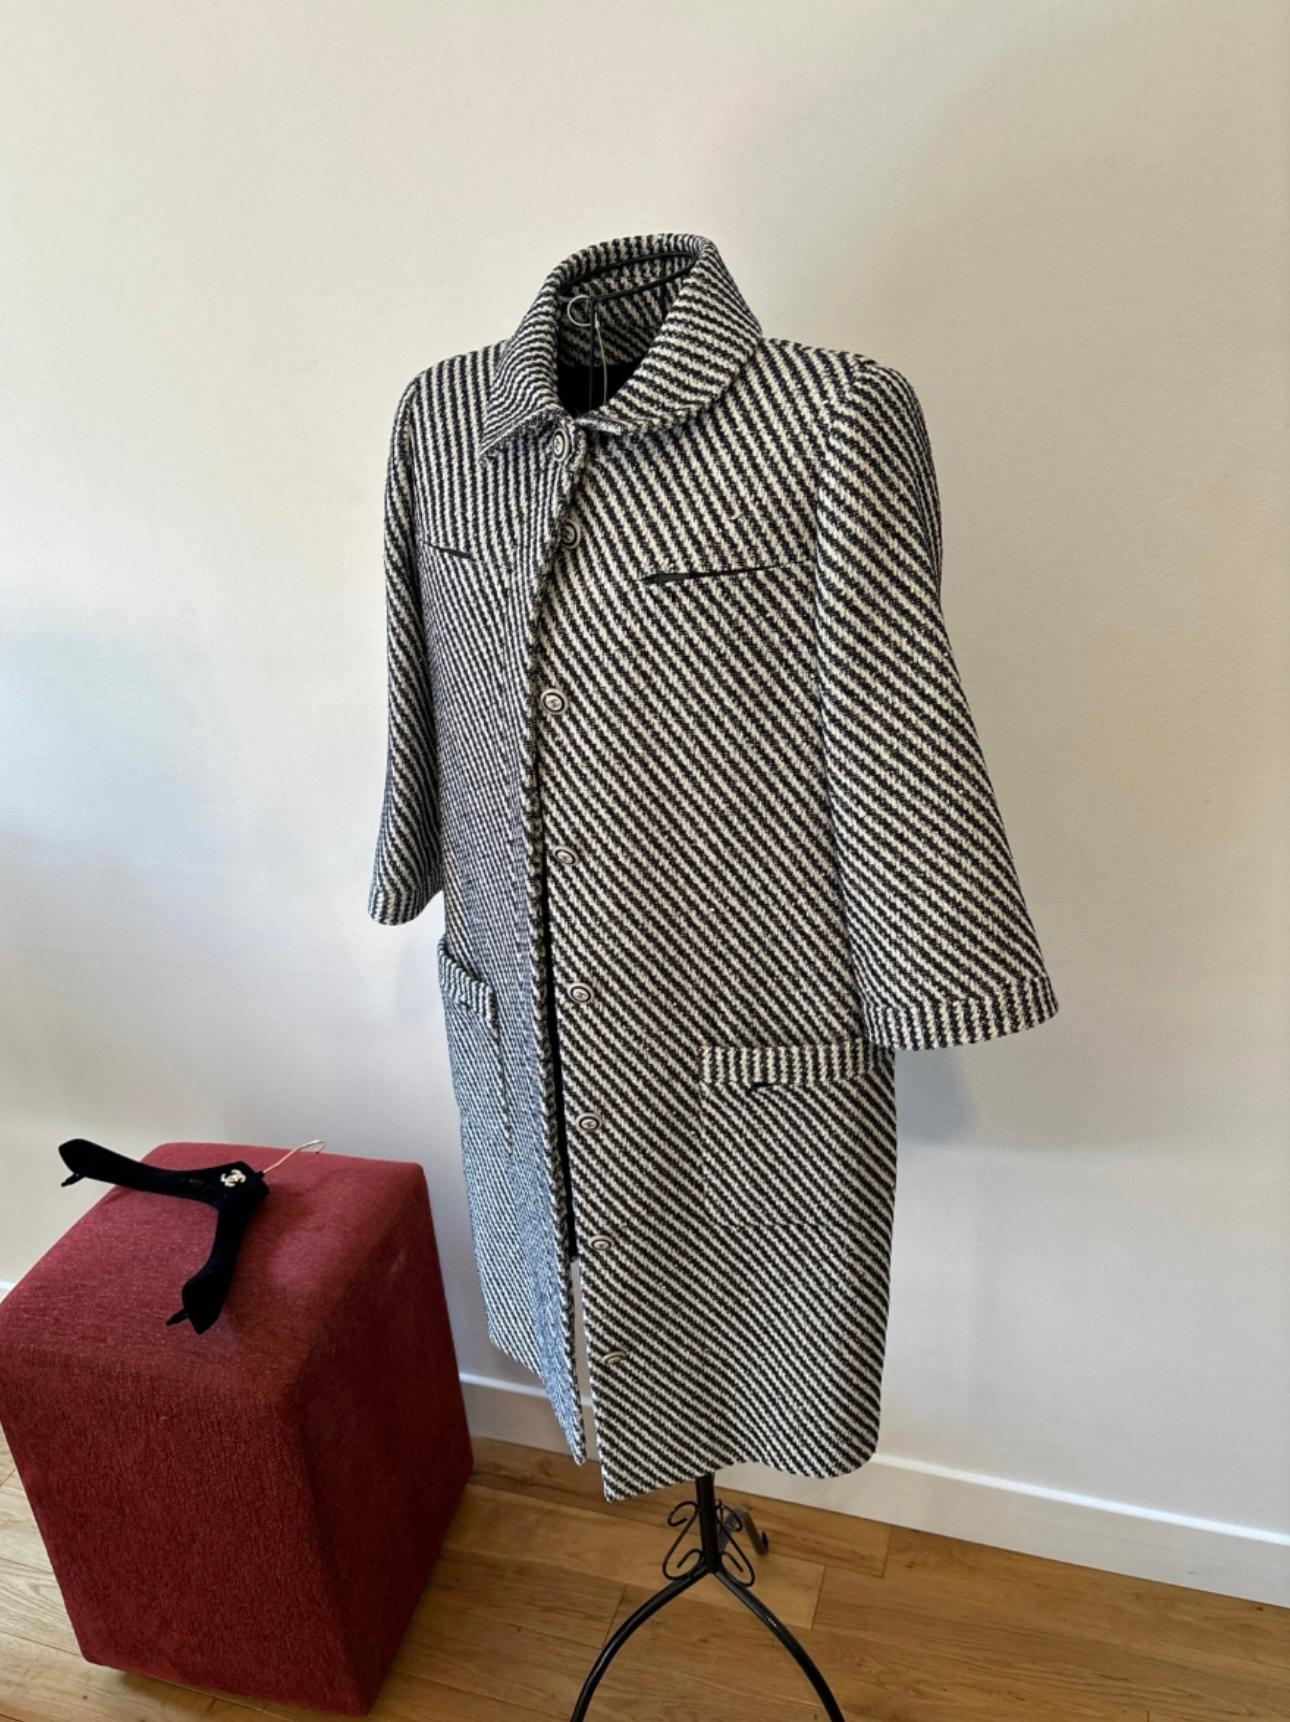 Chanel black and ecru tweed coat / jacket with CC logo buttons
Black silk lining
SIze mark 36 FR. Condition is pristine, equal to new.Chanel black and ecru tweed coat / jacket with CC logo buttons
Black silk lining
SIze mark 36 FR. Condition is